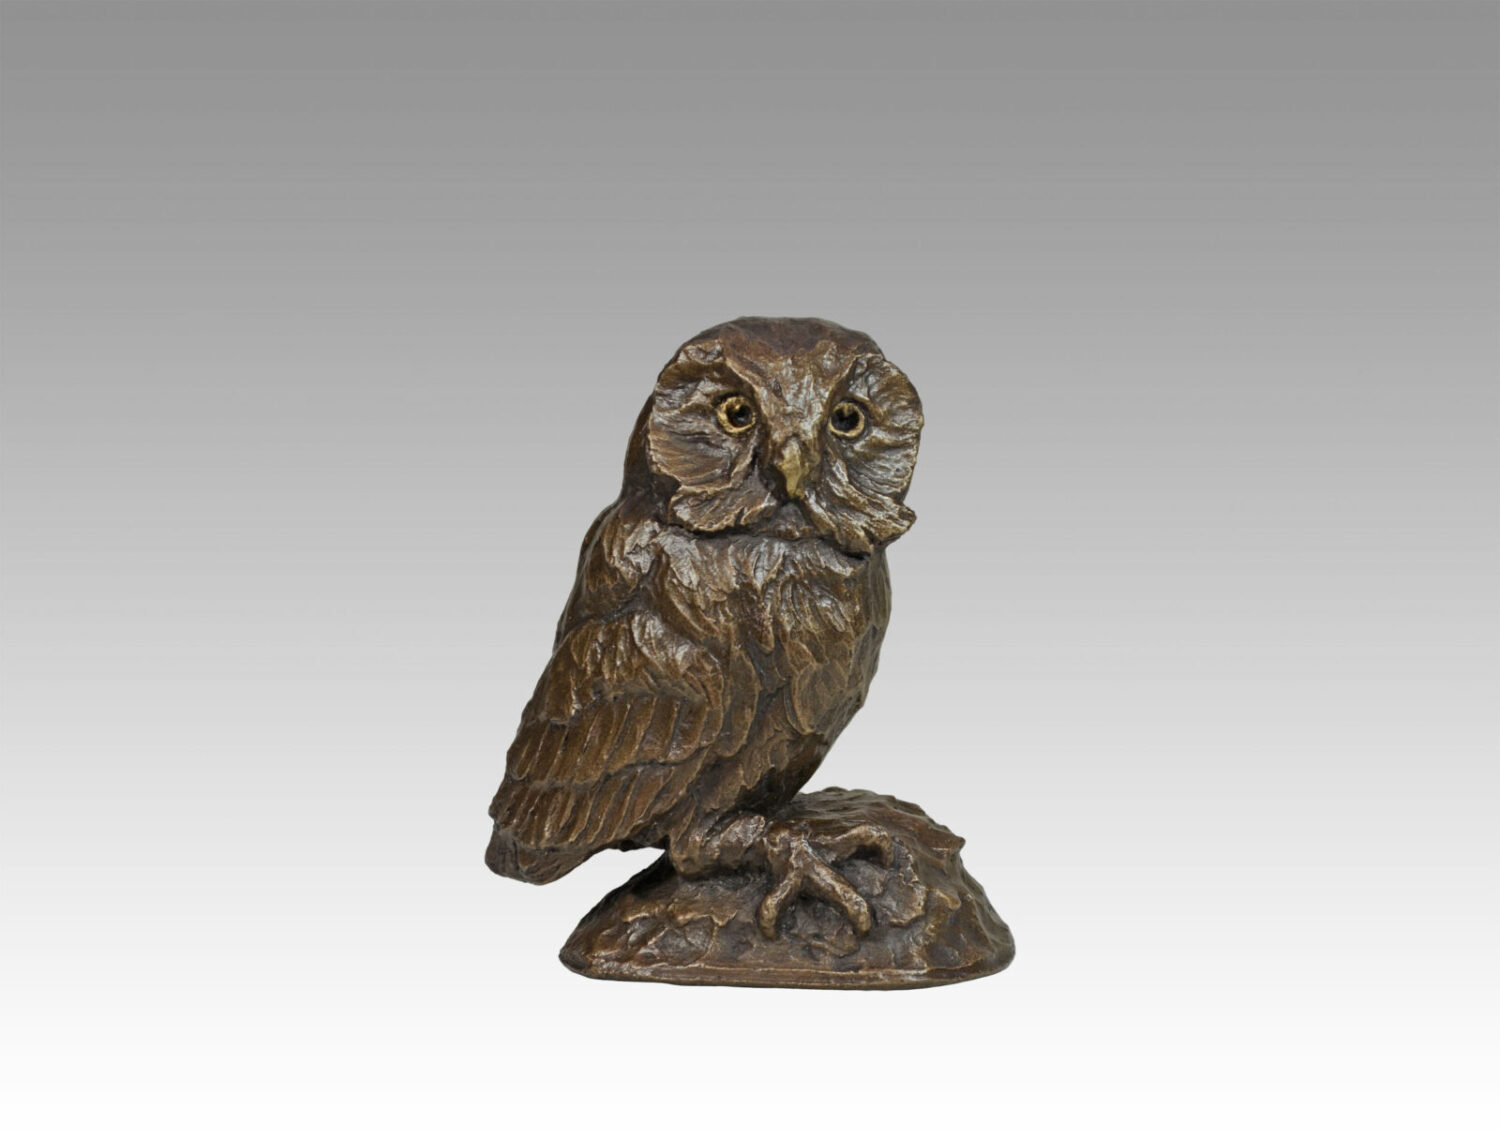 Gallery, Saw-Whet Solo, $175 CAD, Metal Infused, 6" H, Edition 60, Wildlife Sculpture of a Saw-Whet Owl, Sculptor Tyler Fauvelle